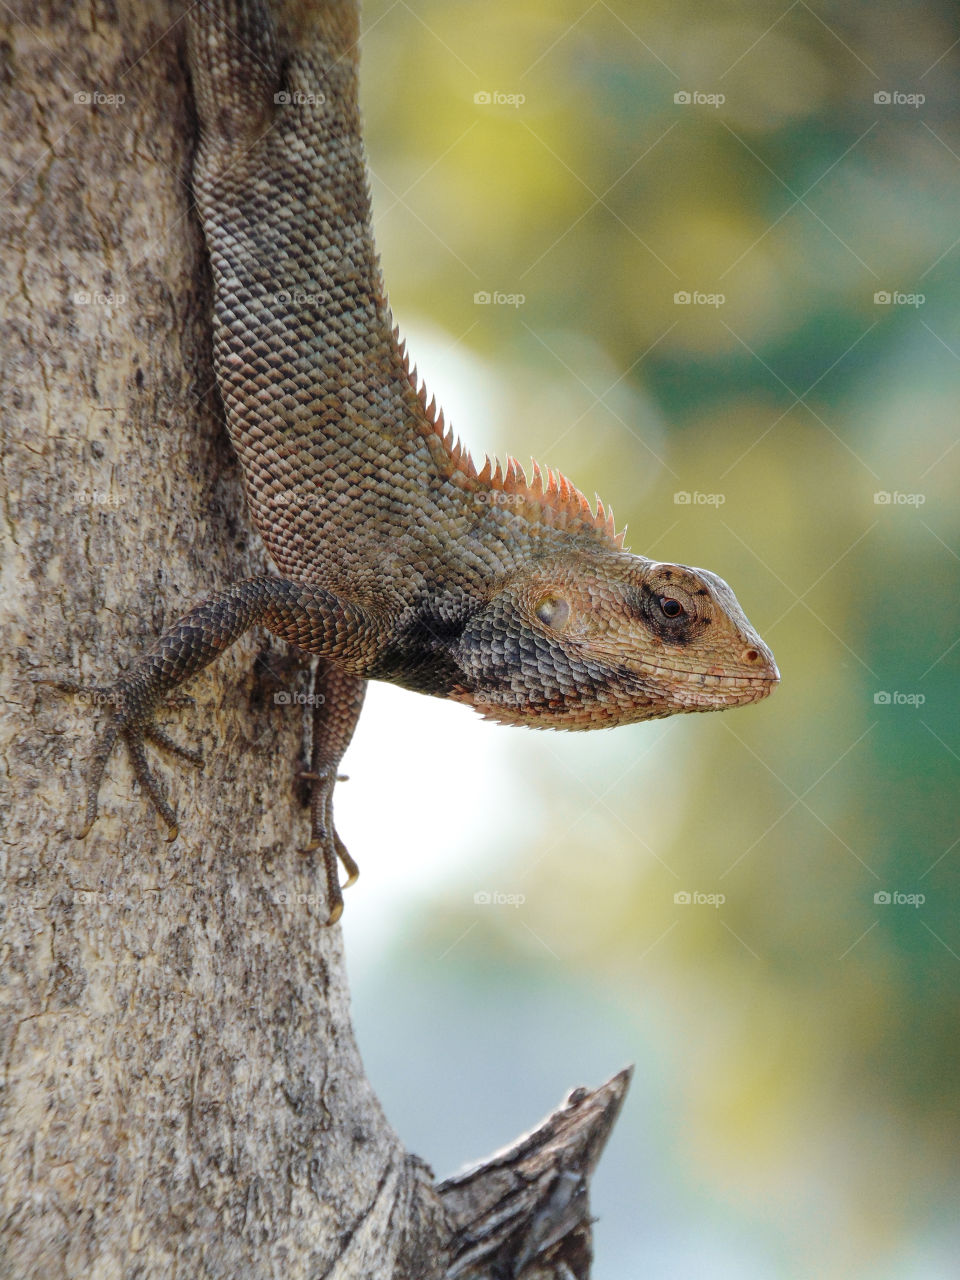 Faded color of the calotes versicolor lizard. because he knows i'm coming, he is trying to camuflage